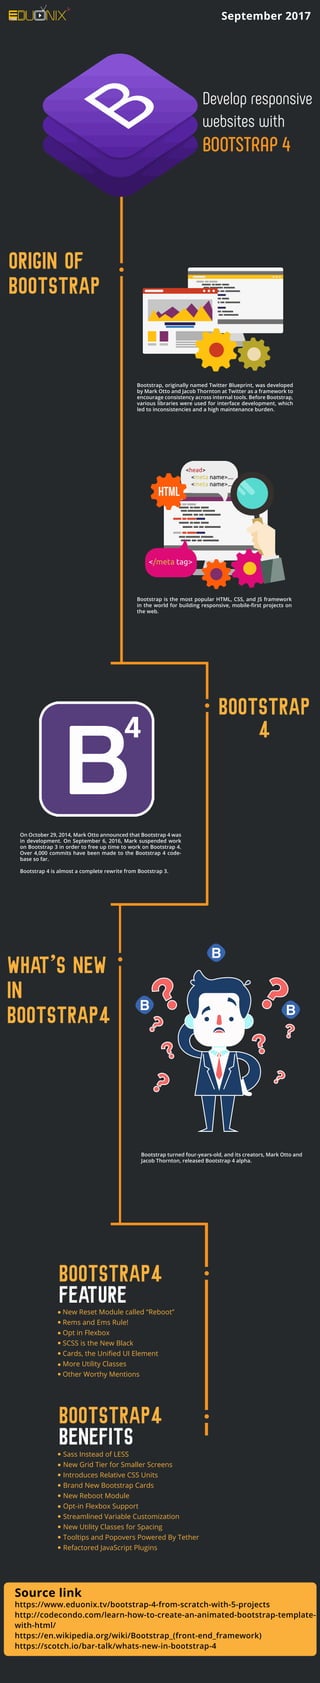 Develop responsive
websites with
BOOTSTRAP 4
Origin of
Bootstrap
What s New
in
Bootstrap4
Bootstrap4
feature
Bootstrap4
benefits
Bootstrap
4
Bootstrap, originally named Twitter Blueprint, was developed
by Mark Otto and Jacob Thornton at Twitter as a framework to
encourage consistency across internal tools. Before Bootstrap,
various libraries were used for interface development, which
led to inconsistencies and a high maintenance burden.
On October 29, 2014, Mark Otto announced that Bootstrap 4 was
in development. On September 6, 2016, Mark suspended work
on Bootstrap 3 in order to free up time to work on Bootstrap 4.
Over 4,000 commits have been made to the Bootstrap 4 code-
base so far.
Bootstrap 4 is almost a complete rewrite from Bootstrap 3.
Bootstrap turned four-years-old, and its creators, Mark Otto and
Jacob Thornton, released Bootstrap 4 alpha.
Bootstrap is the most popular HTML, CSS, and JS framework
in the world for building responsive, mobile-ﬁrst projects on
the web.
4
?
?
?
?
?
?
??
New Reset Module called “Reboot”
Rems and Ems Rule!
Opt in Flexbox
SCSS is the New Black
Cards, the Uniﬁed UI Element
More Utility Classes
Other Worthy Mentions
Sass Instead of LESS
New Grid Tier for Smaller Screens
Introduces Relative CSS Units
Brand New Bootstrap Cards
New Reboot Module
Opt-in Flexbox Support
Streamlined Variable Customization
New Utility Classes for Spacing
Tooltips and Popovers Powered By Tether
Refactored JavaScript Plugins
Source link
https://www.eduonix.tv/bootstrap-4-from-scratch-with-5-projects
http://codecondo.com/learn-how-to-create-an-animated-bootstrap-template-
with-html/
https://en.wikipedia.org/wiki/Bootstrap_(front-end_framework)
https://scotch.io/bar-talk/whats-new-in-bootstrap-4
September 2017
’
 